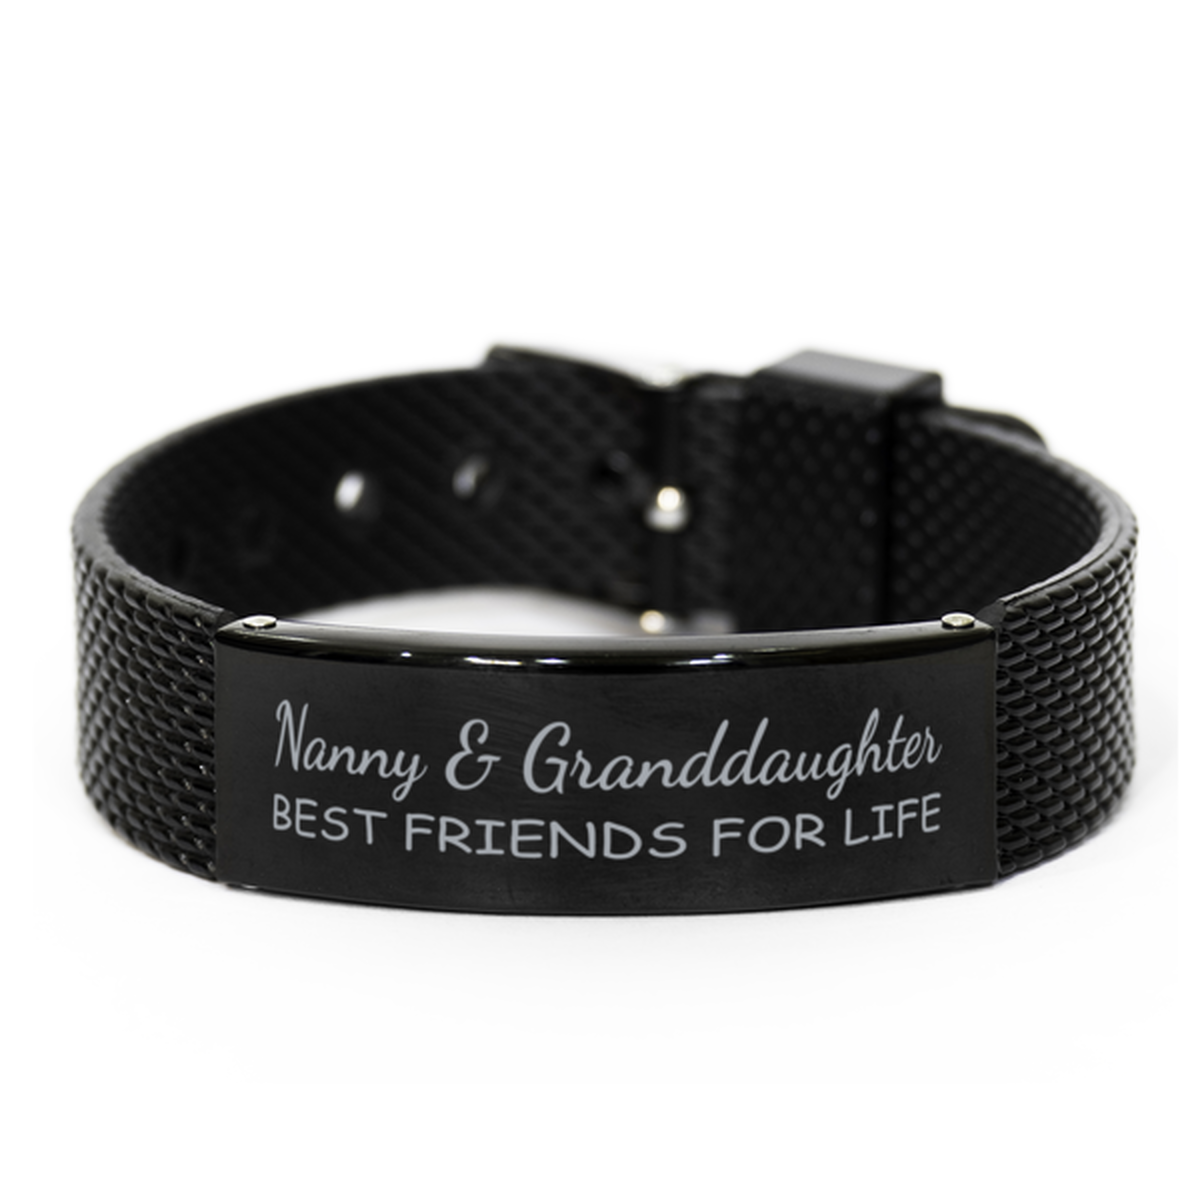 Nanny and Granddaughter Best Friends for Life Bracelet, Nanny Granddaughter Bracelet, Black Stainless Steel Leather Bracelet, Birthday, Christmas.